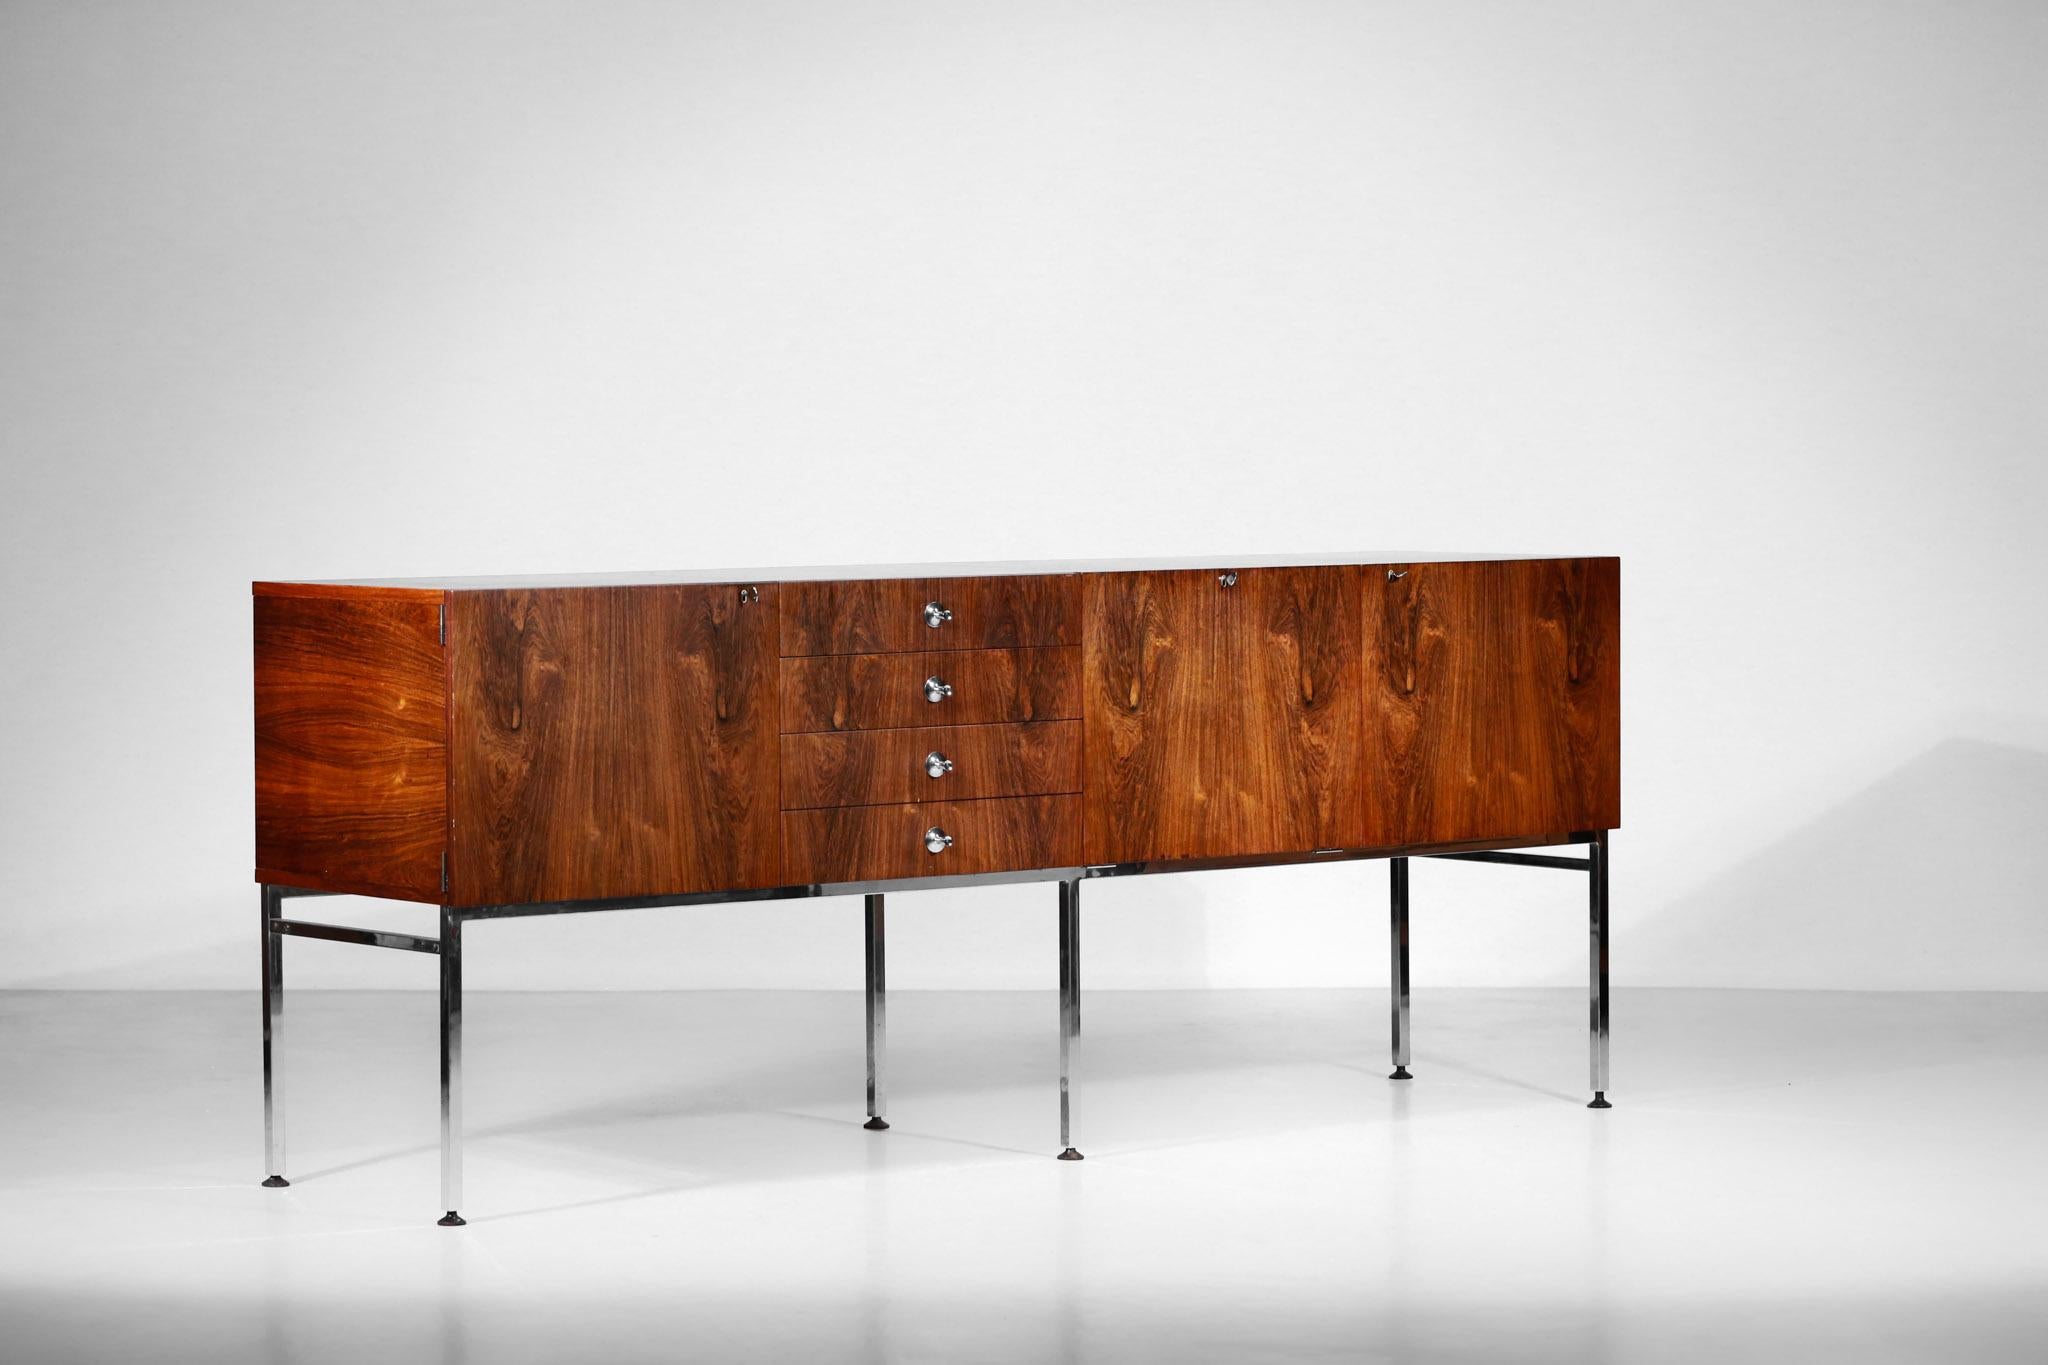 Great Alain Richard Large Sideboard of 1960s for Meuble TV French Design 1960 For Sale 3